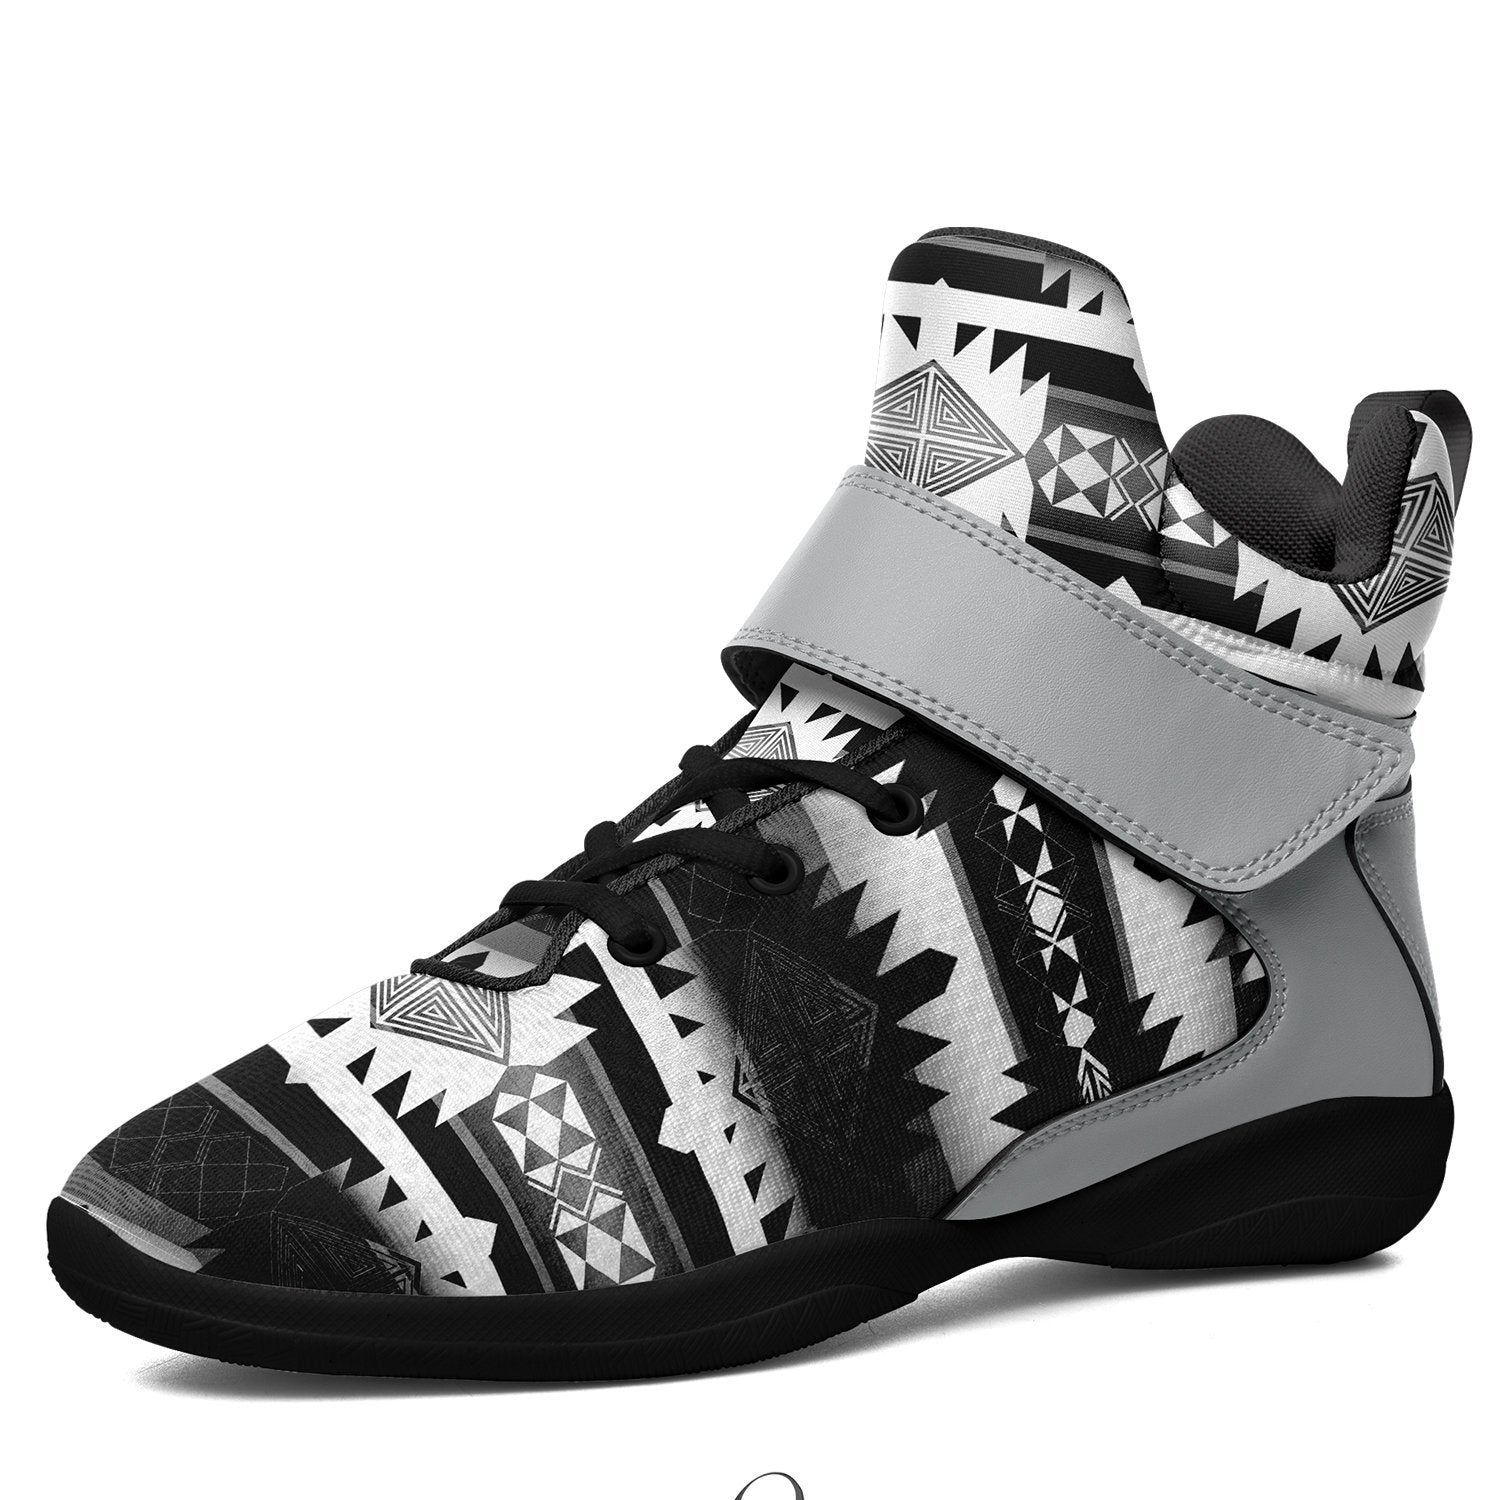 Okotoks Black and White Kid's Ipottaa Basketball / Sport High Top Shoes 49 Dzine US Child 12.5 / EUR 30 Black Sole with Gray Strap 